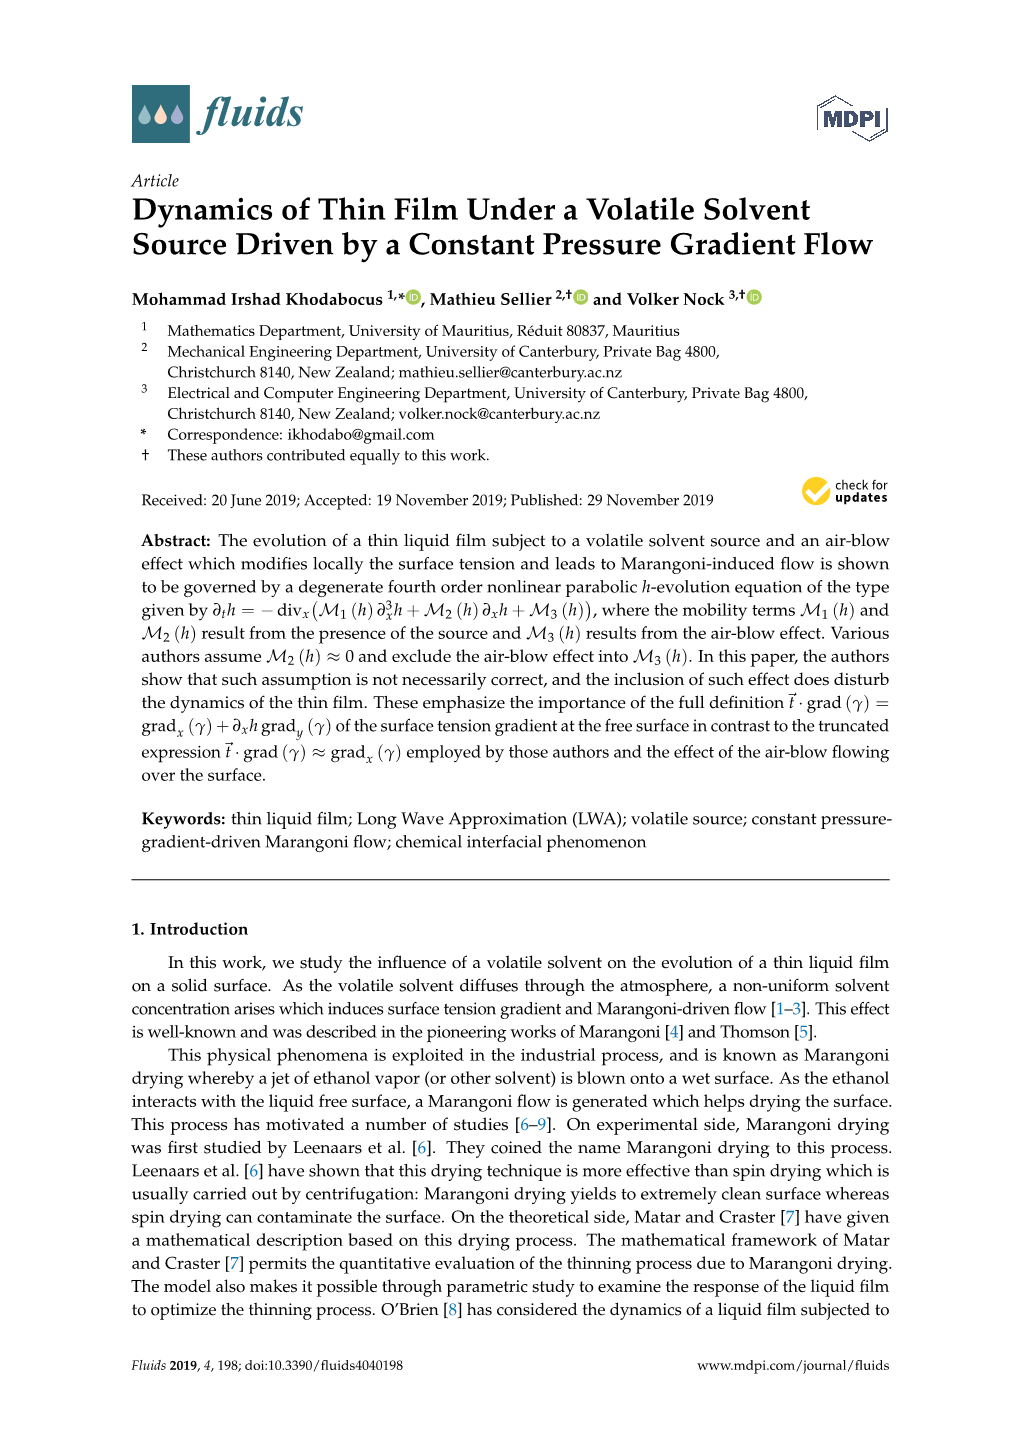 Dynamics of Thin Film Under a Volatile Solvent Source Driven by a Constant Pressure Gradient Flow